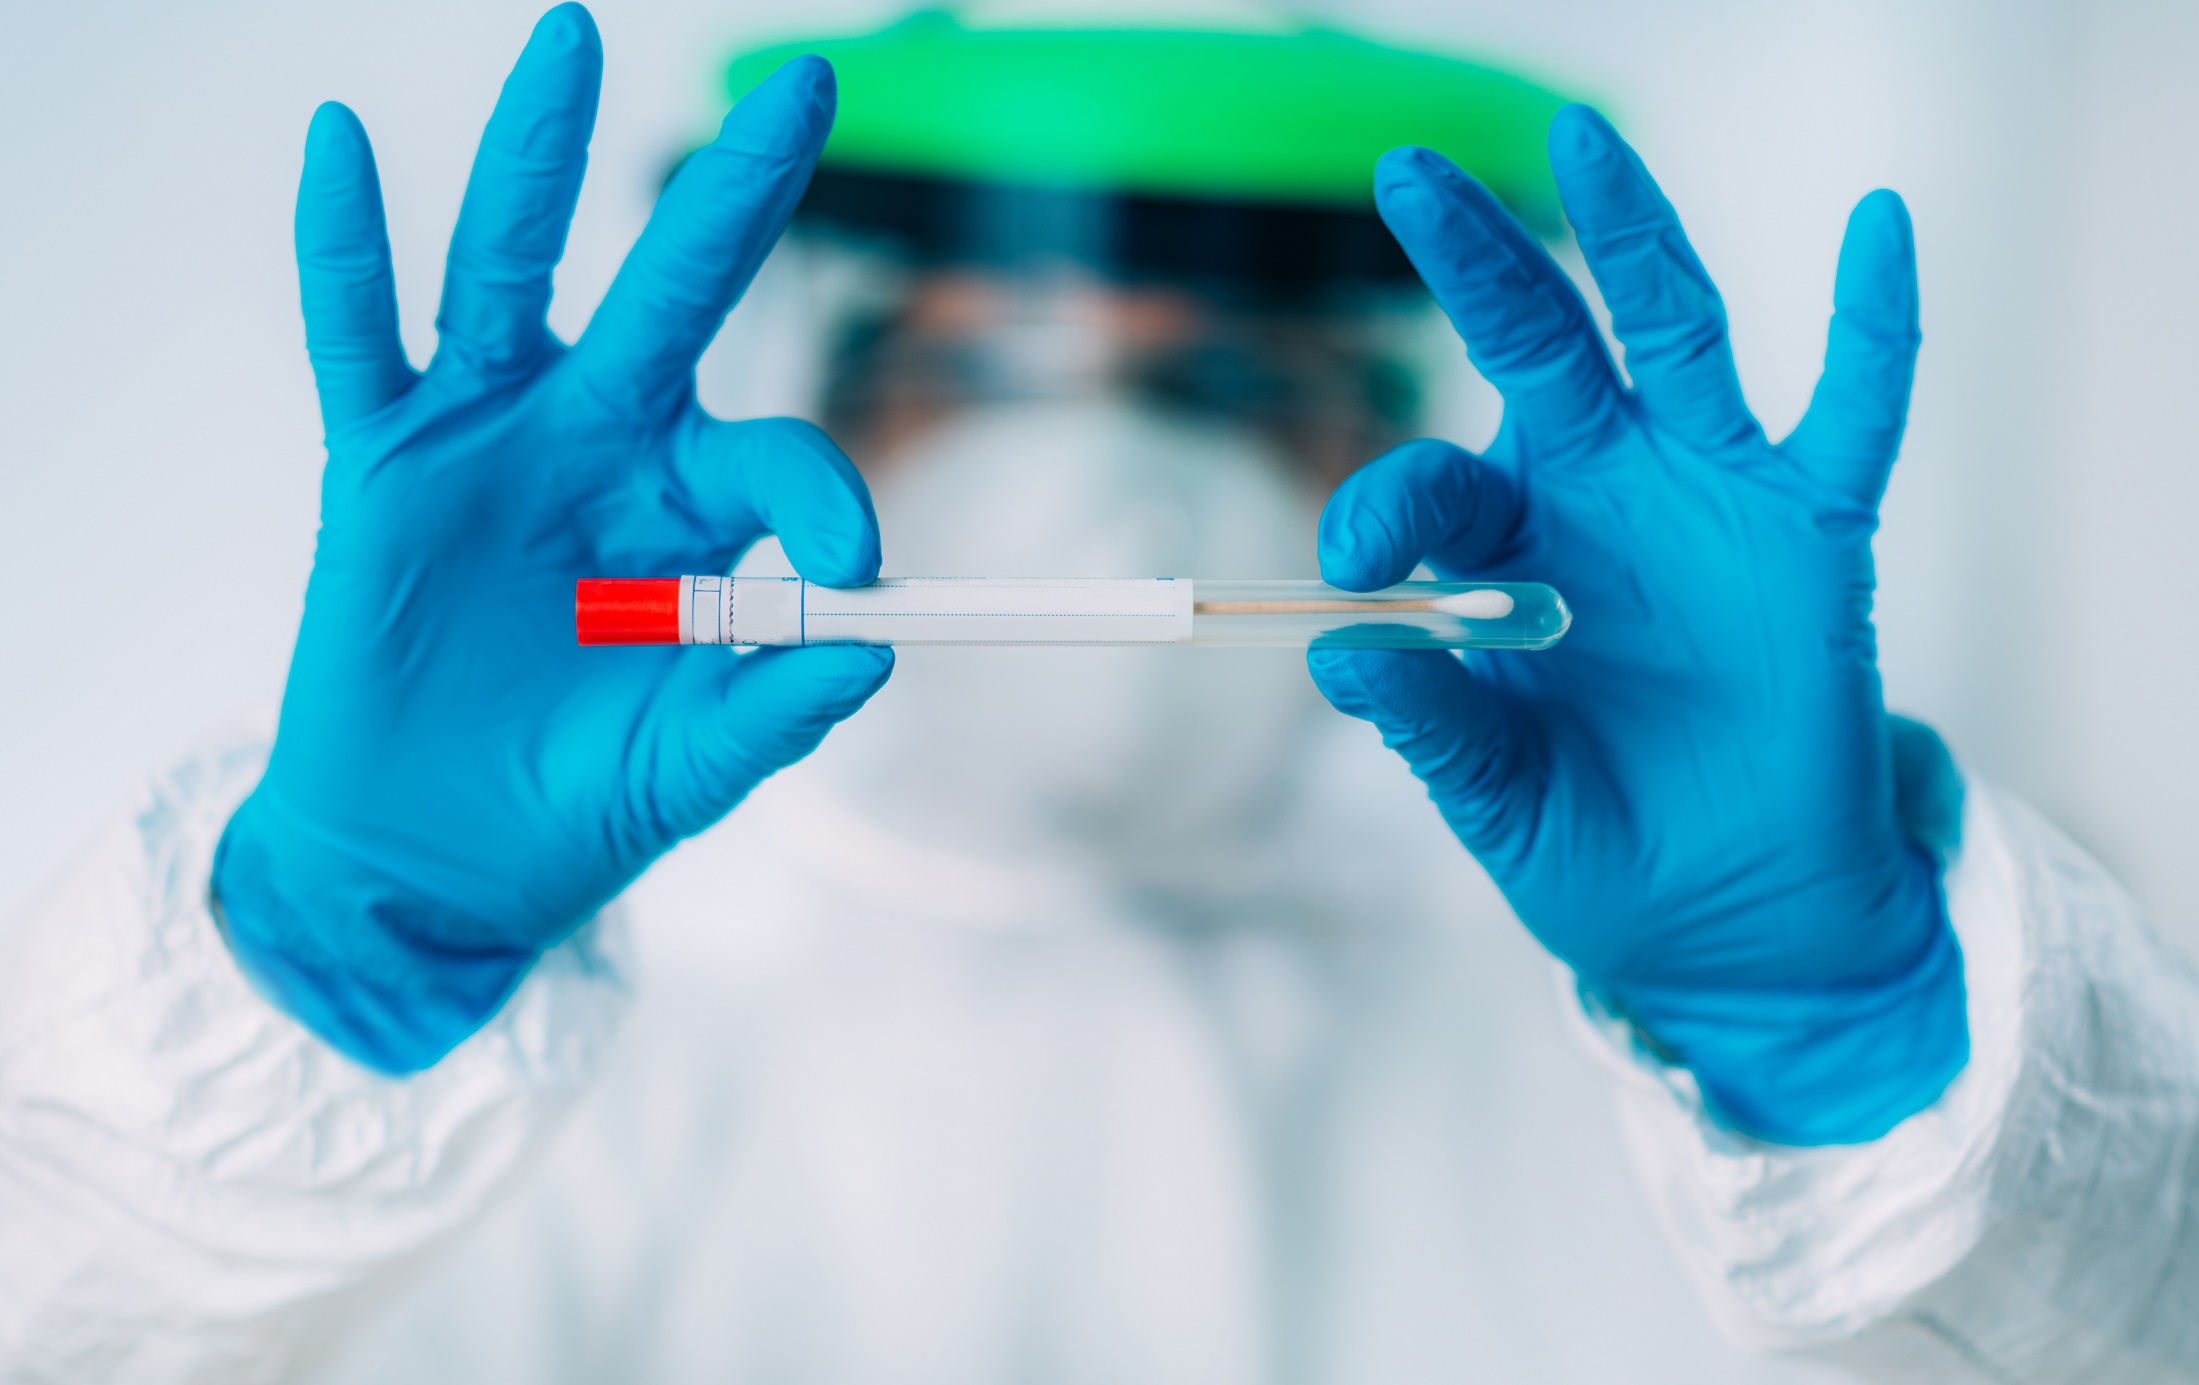 British Travellers Cautious About Paying for Covid PCR Tests